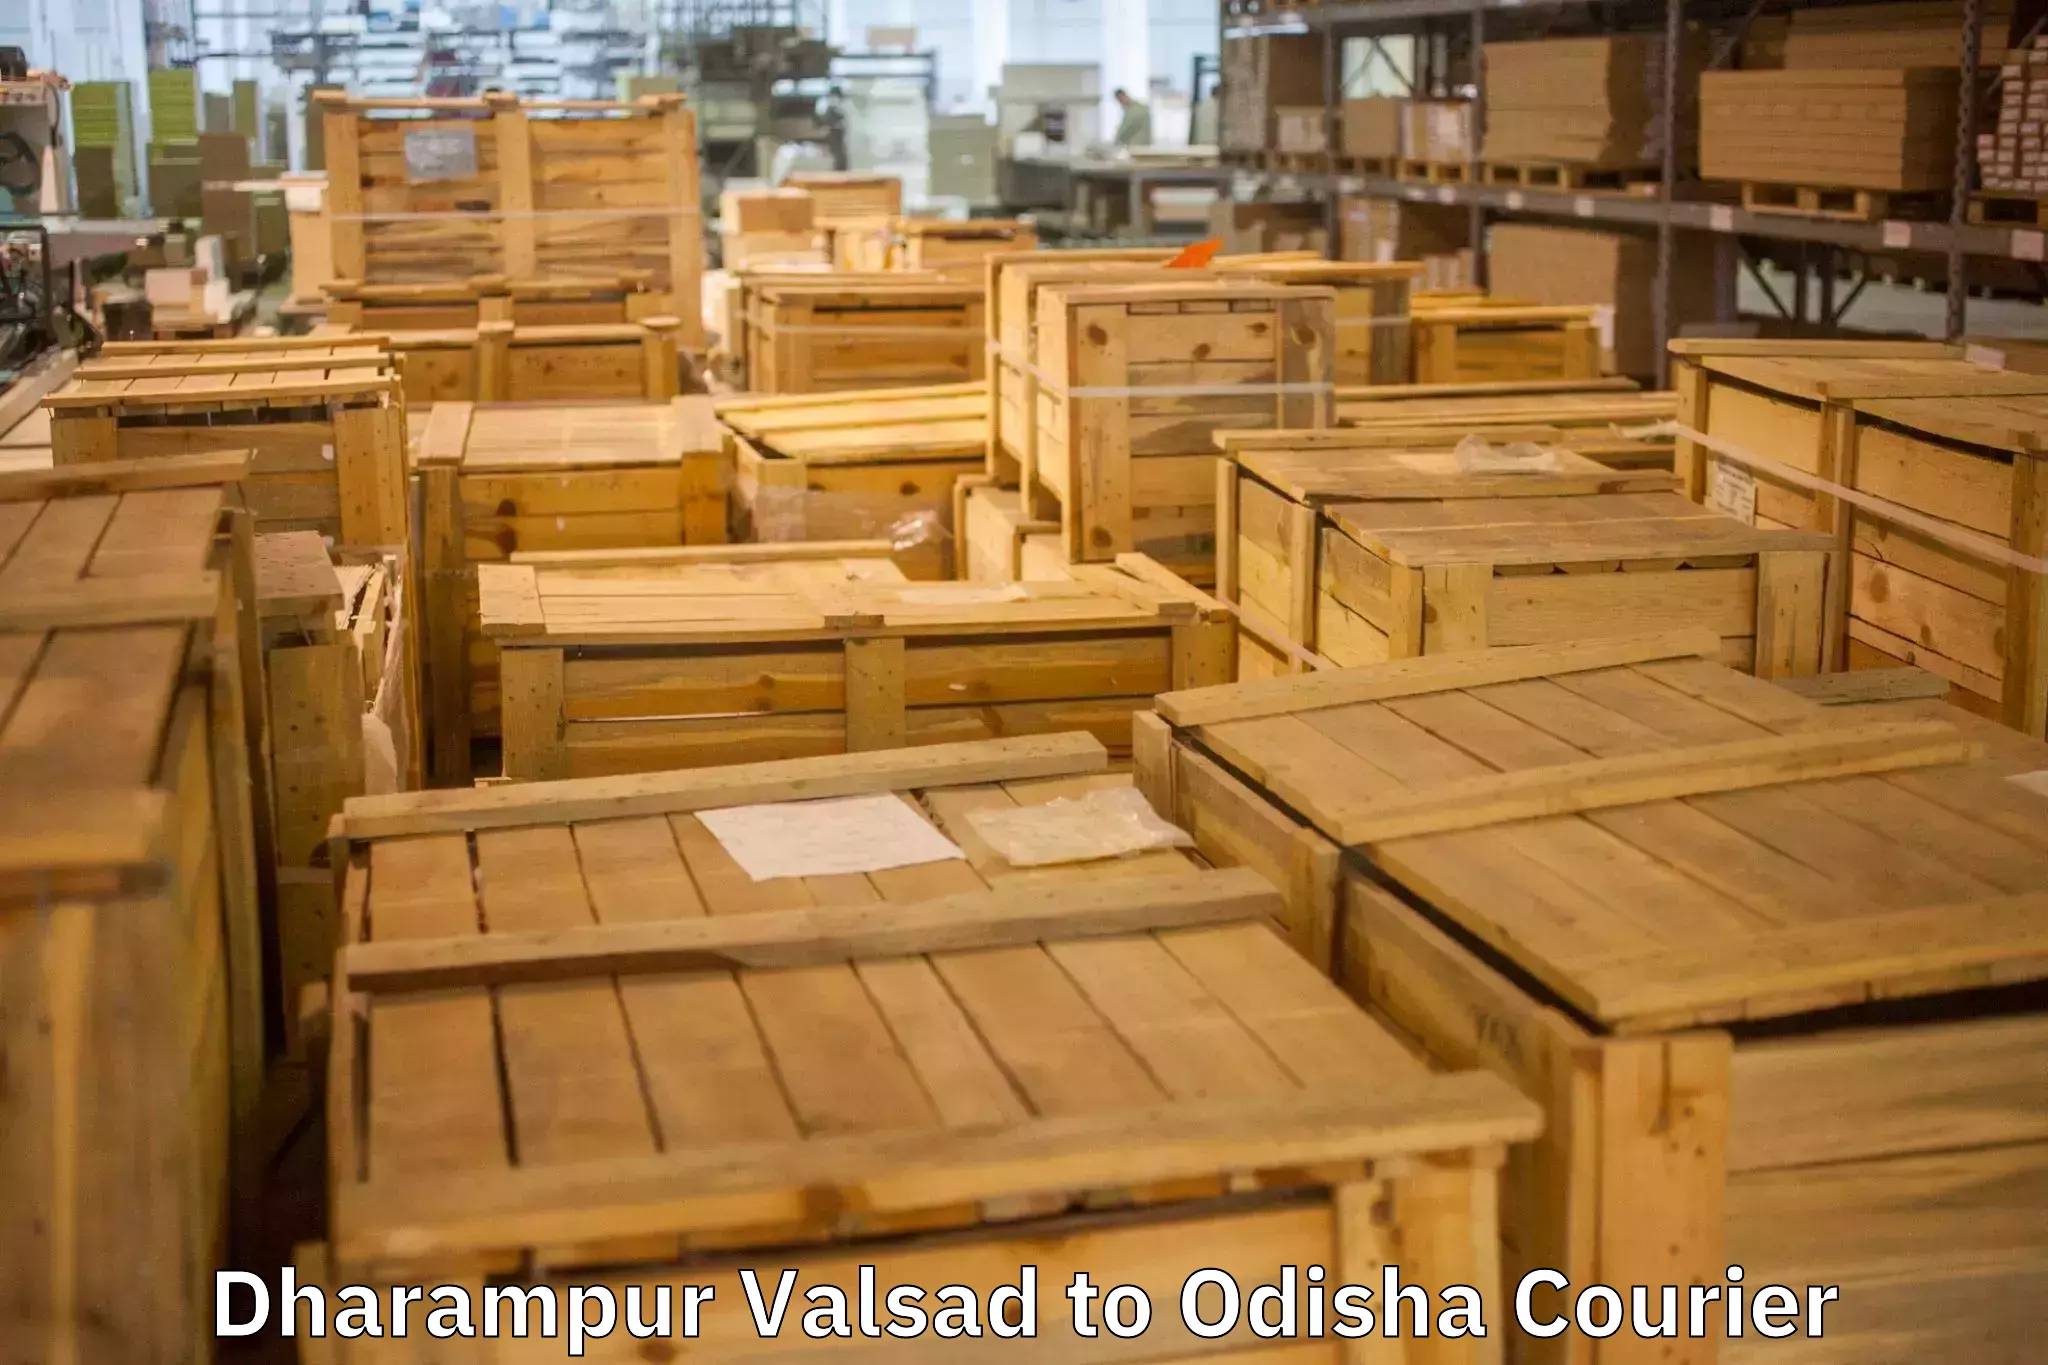 Dependable moving services Dharampur Valsad to Muribahal